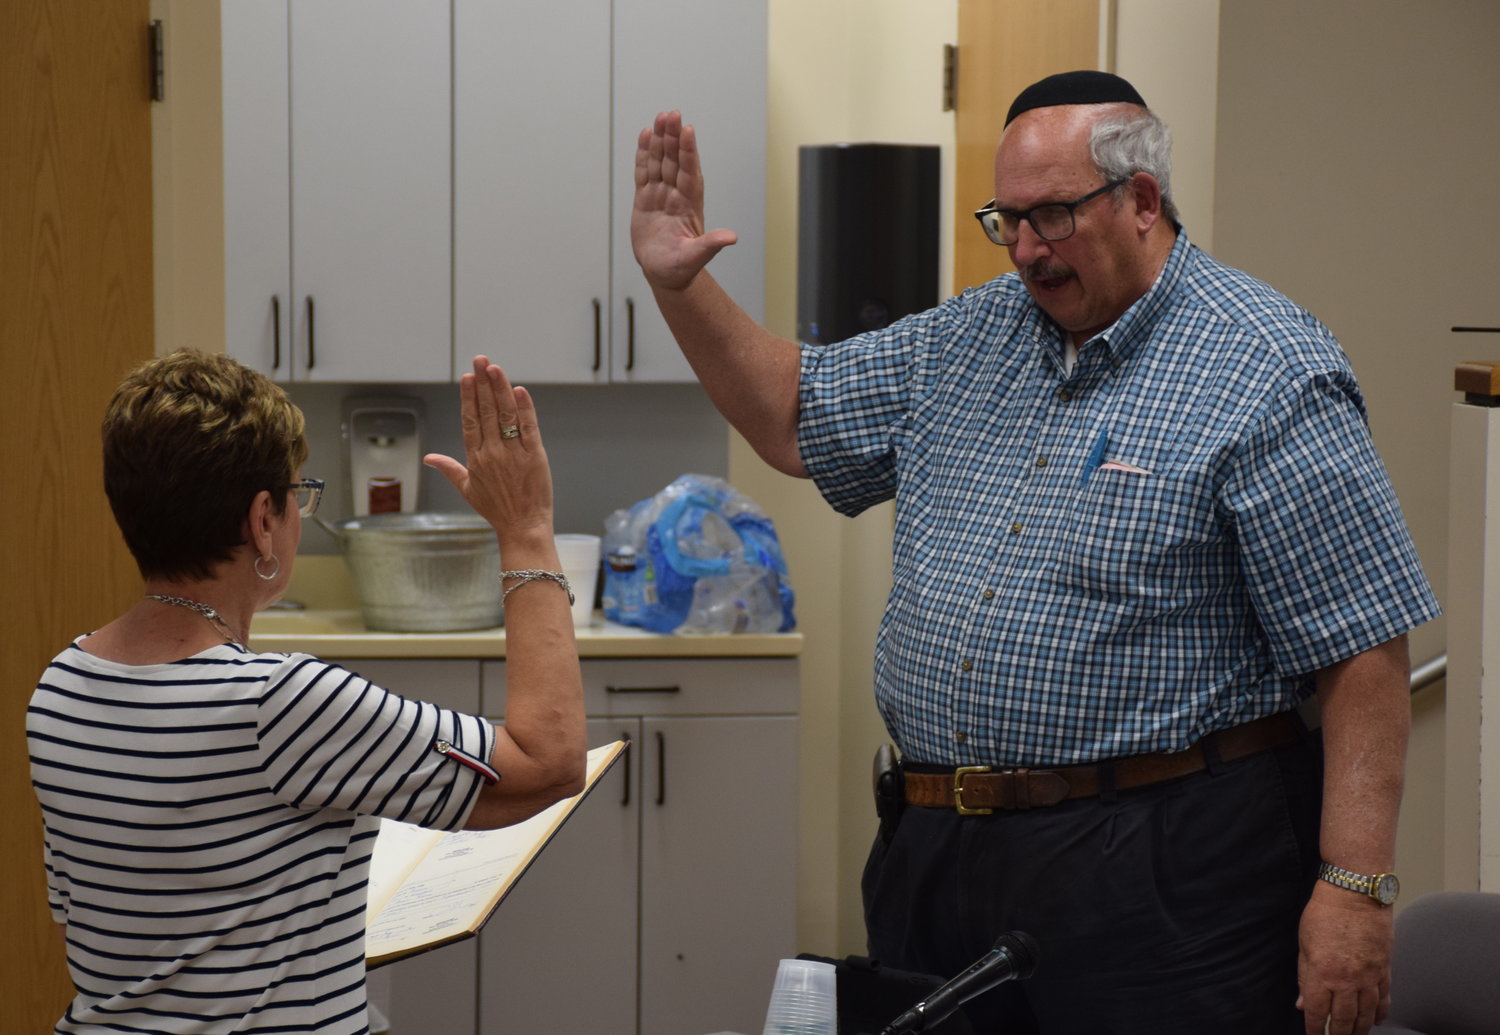 District clerk Theresa Bryant swore in Burt Blass as a new school board trustee at the board’s reorganization meeting.